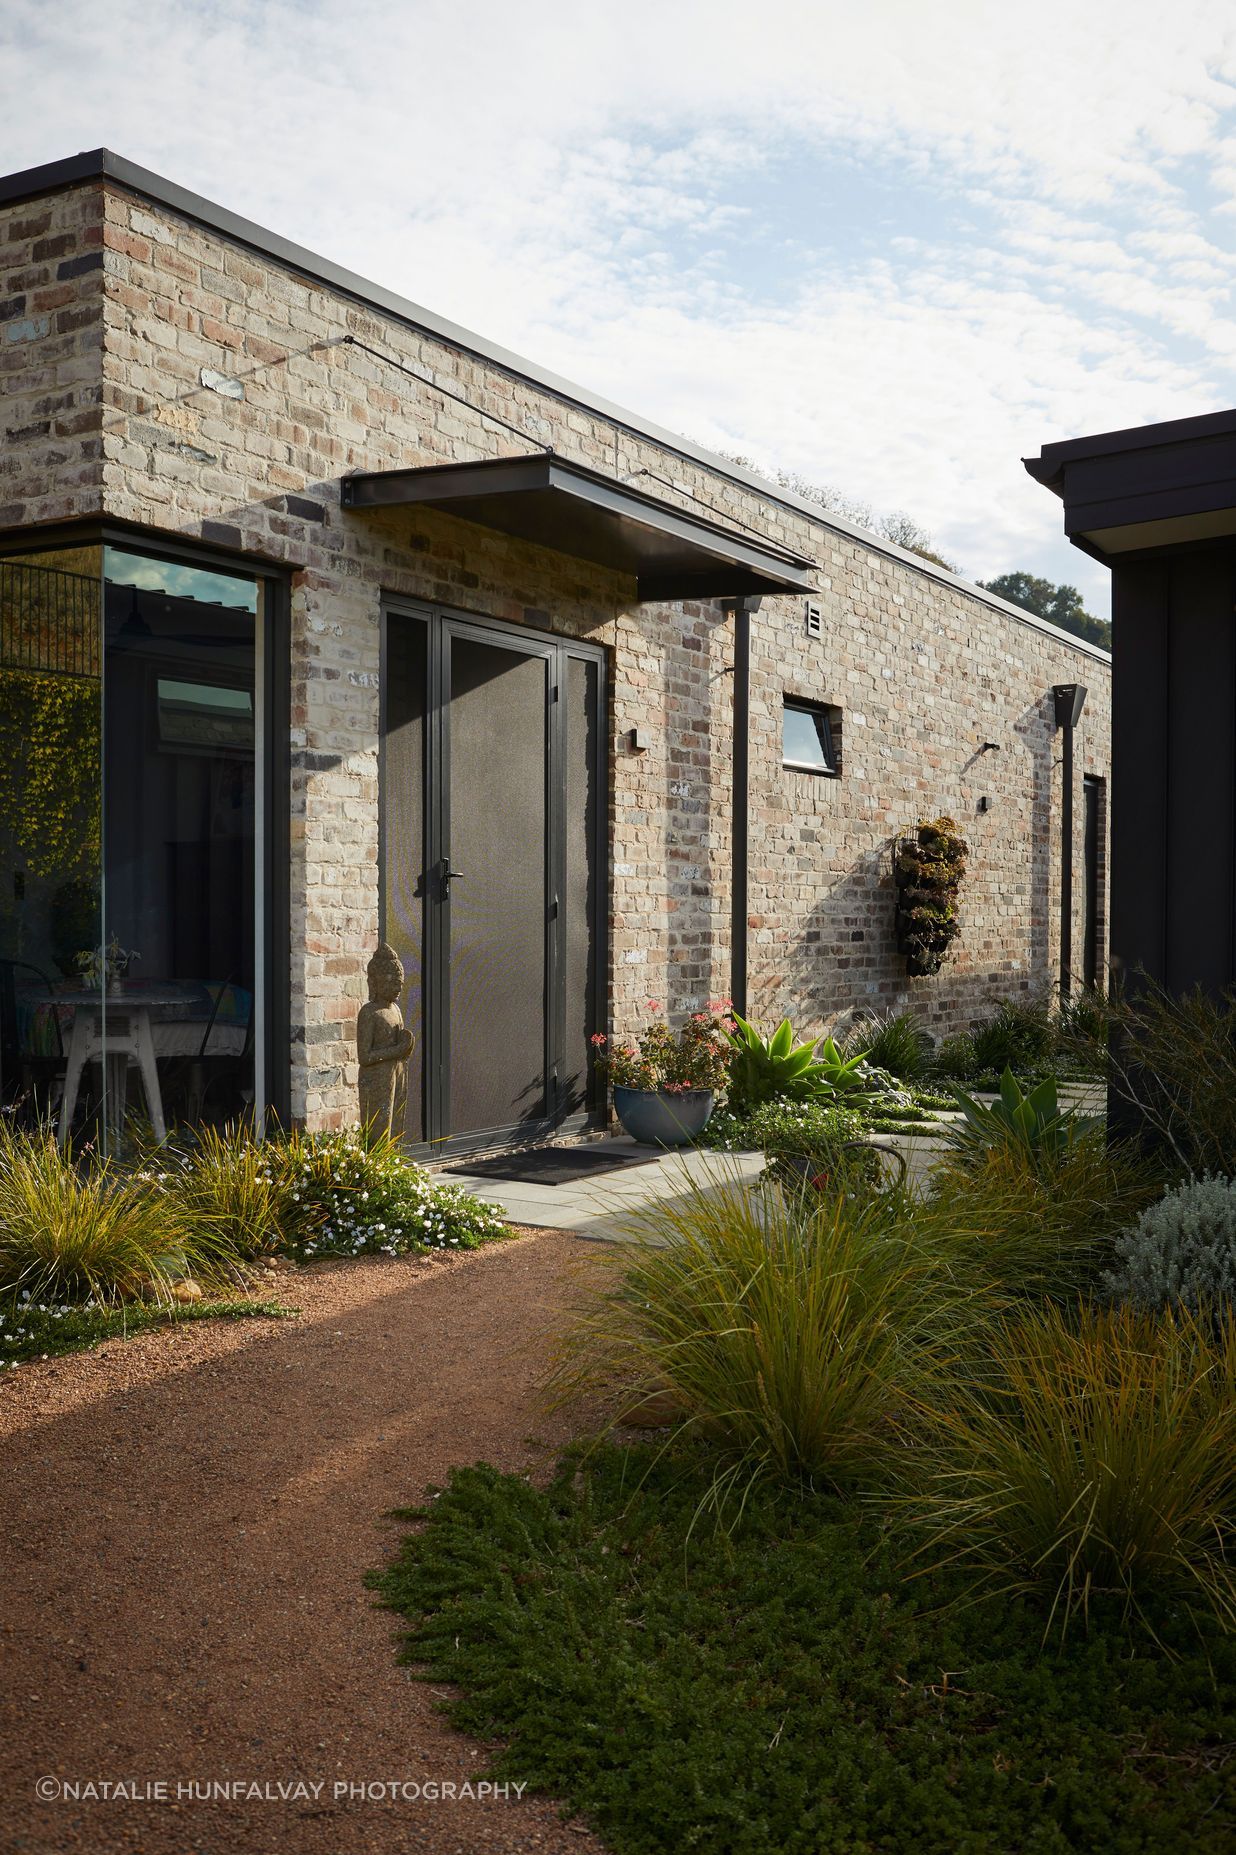 Landscaped gardens show the way to the studio.